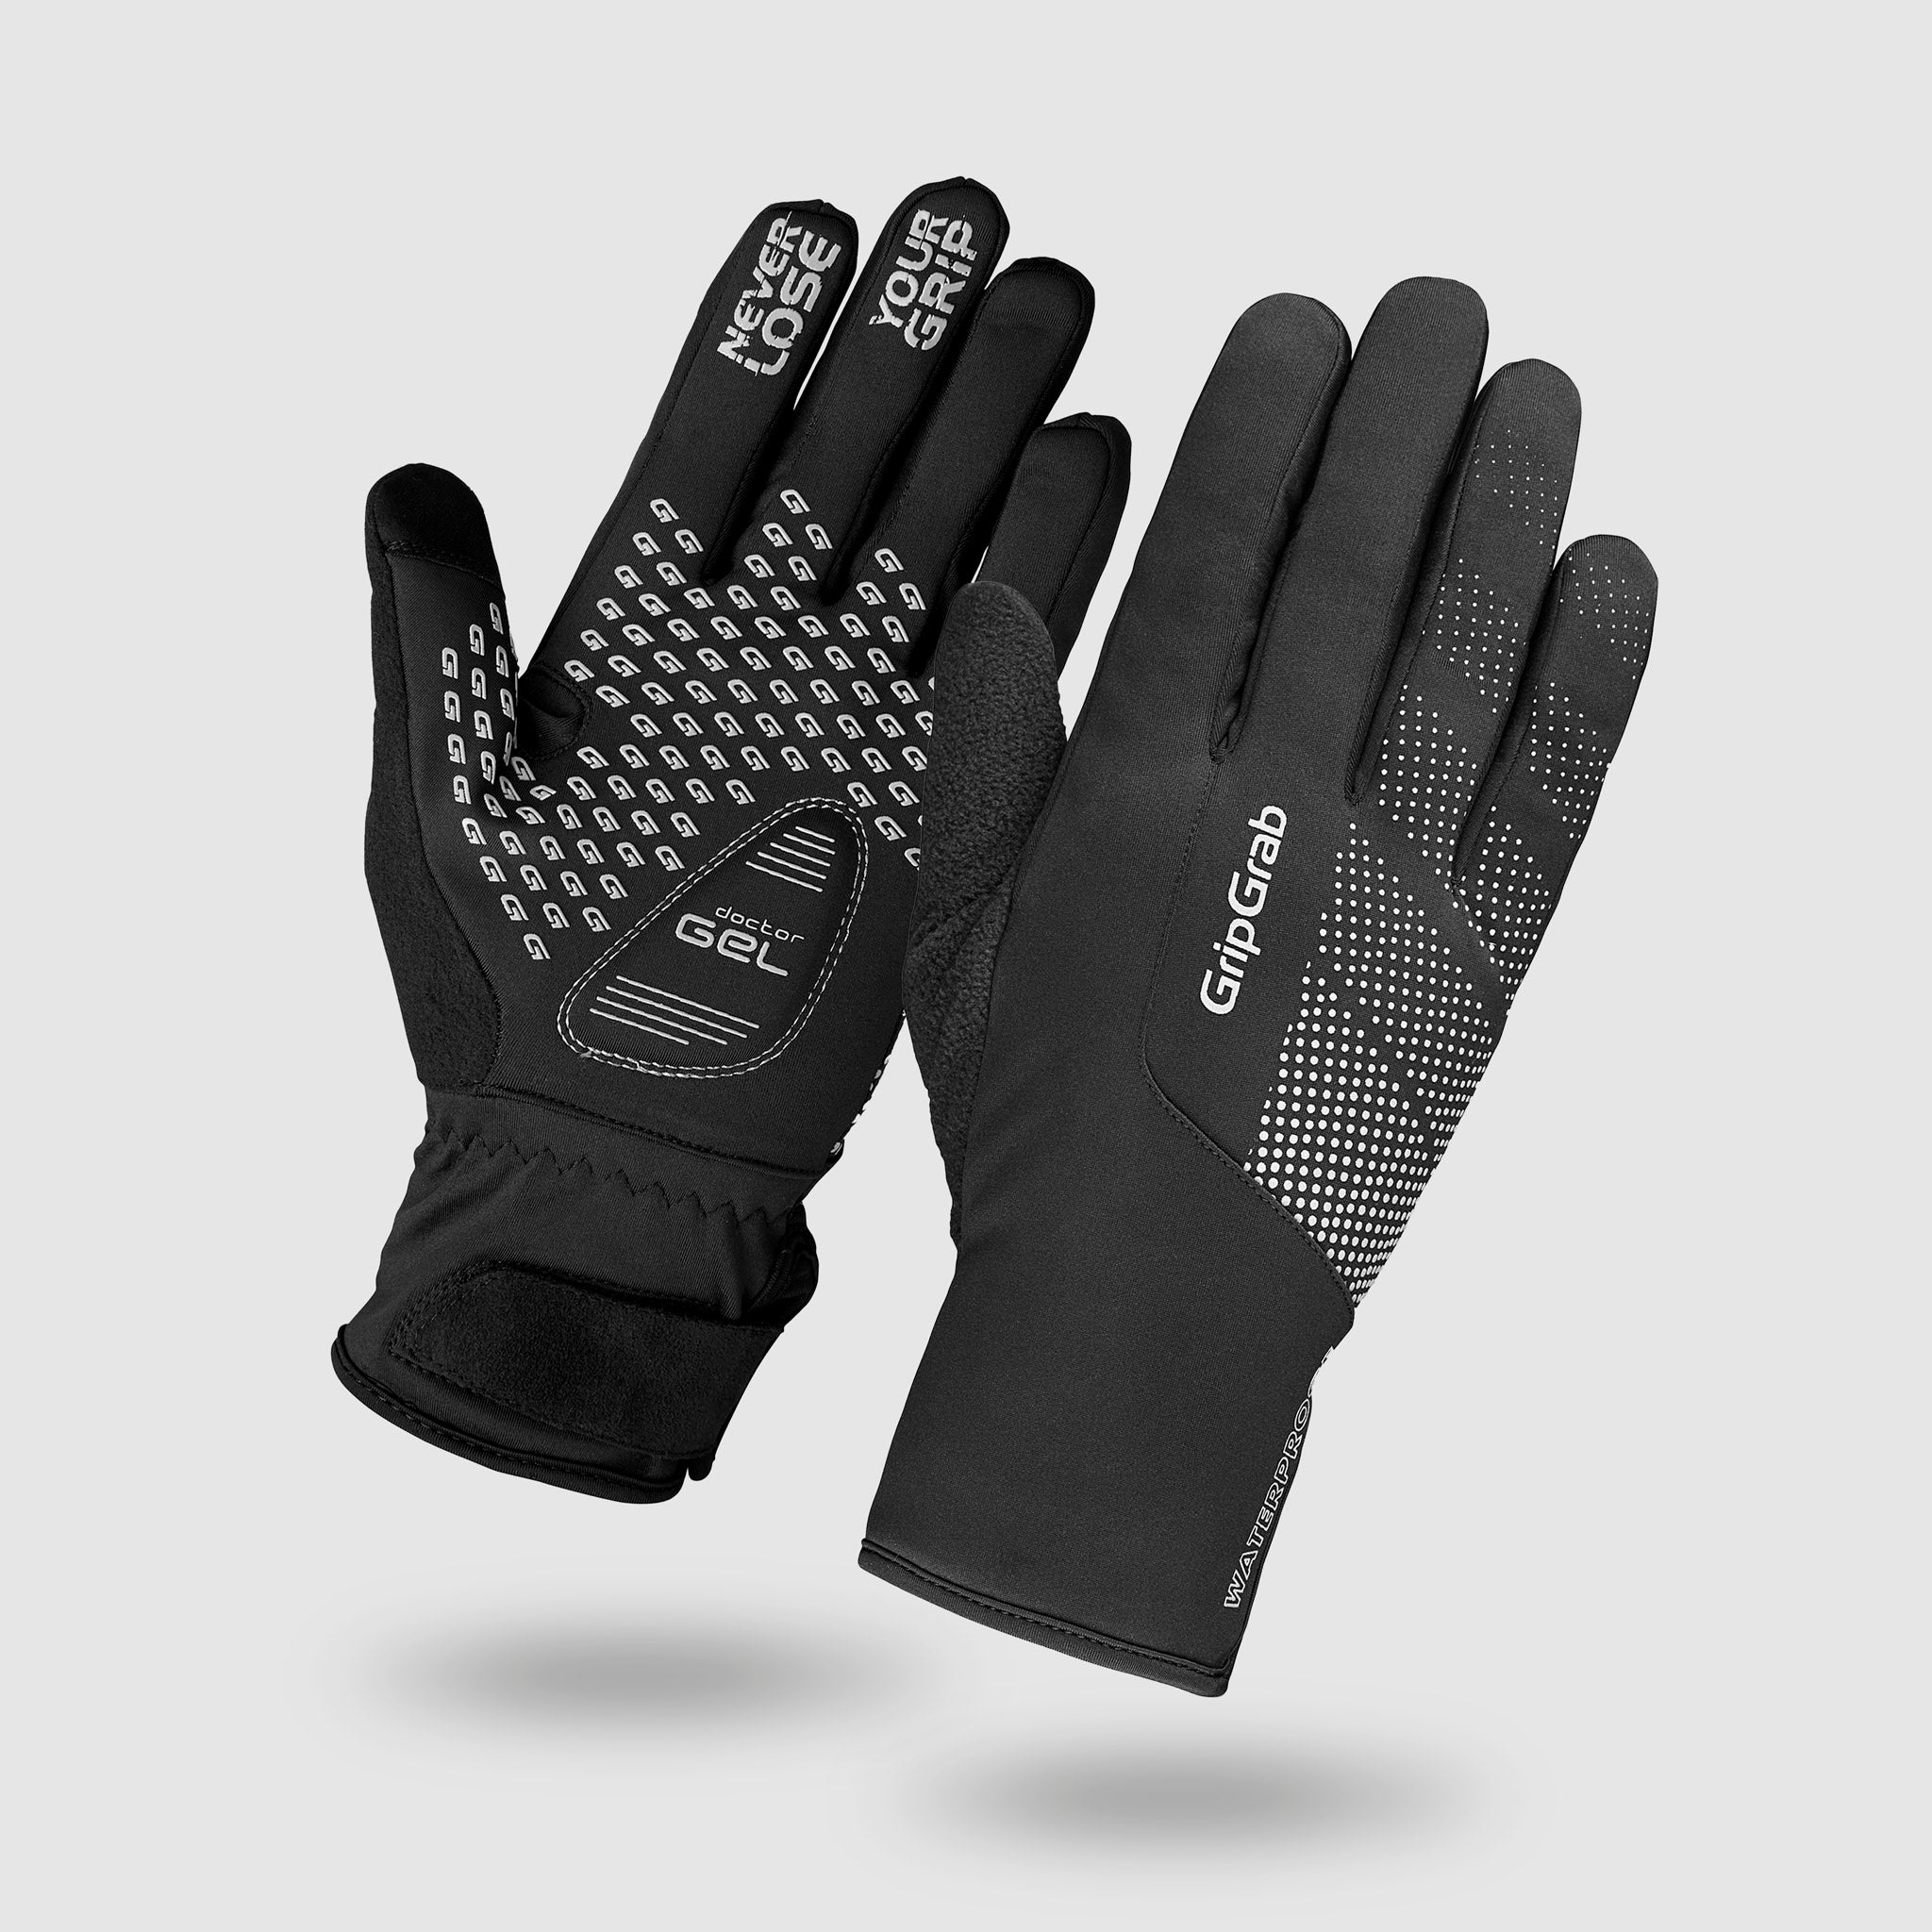 GripGrab Ride Waterproof Winter Thermal Padded Touchscreen Cycling Gloves Fleece-Lined Windproof Black Yellow HiViz